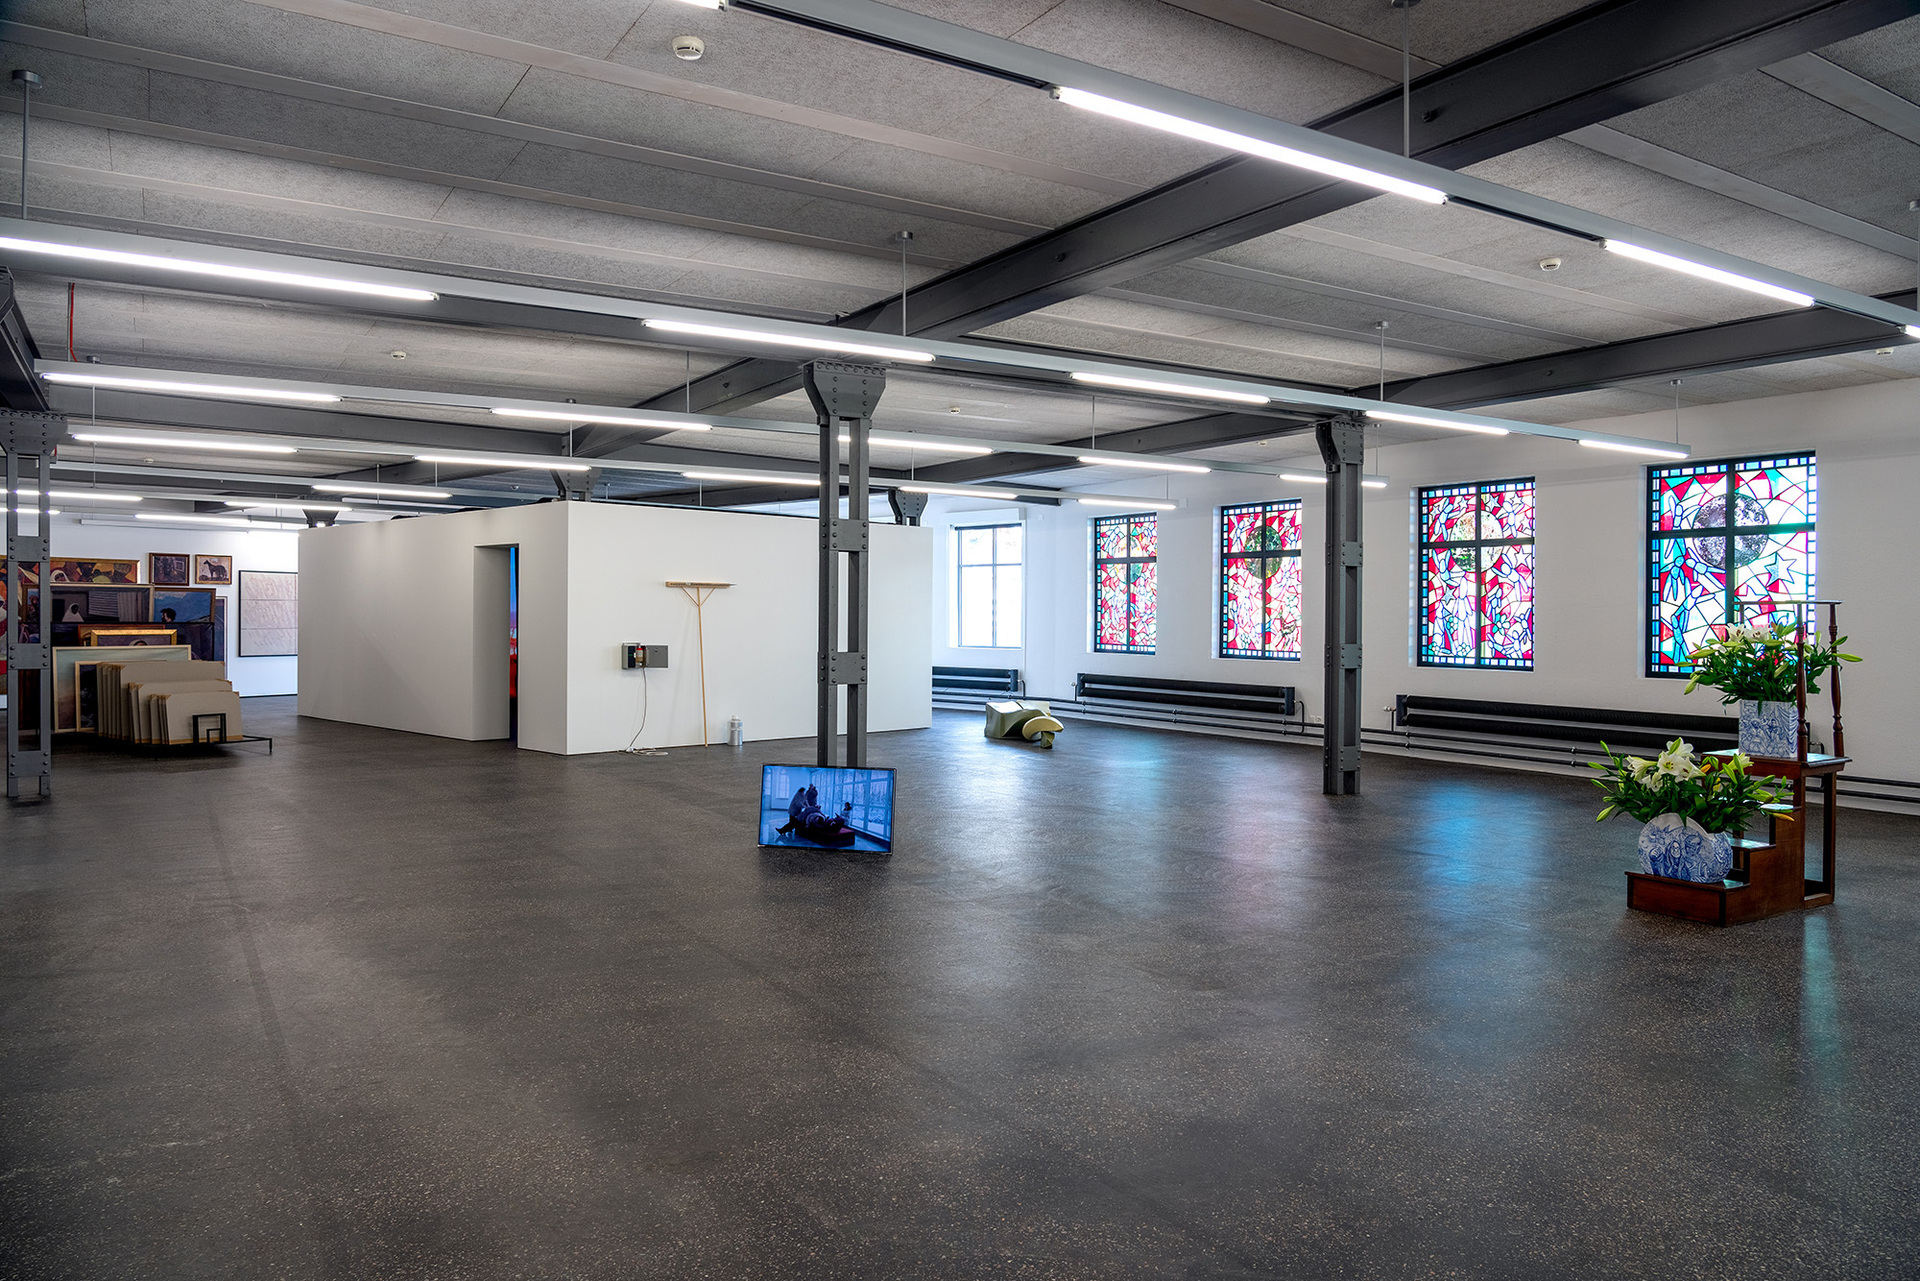 Eat the Museum, installation view, Alte Fabrik, Rapperswil (CH) 2020.  Photo: Niklas Goldbach